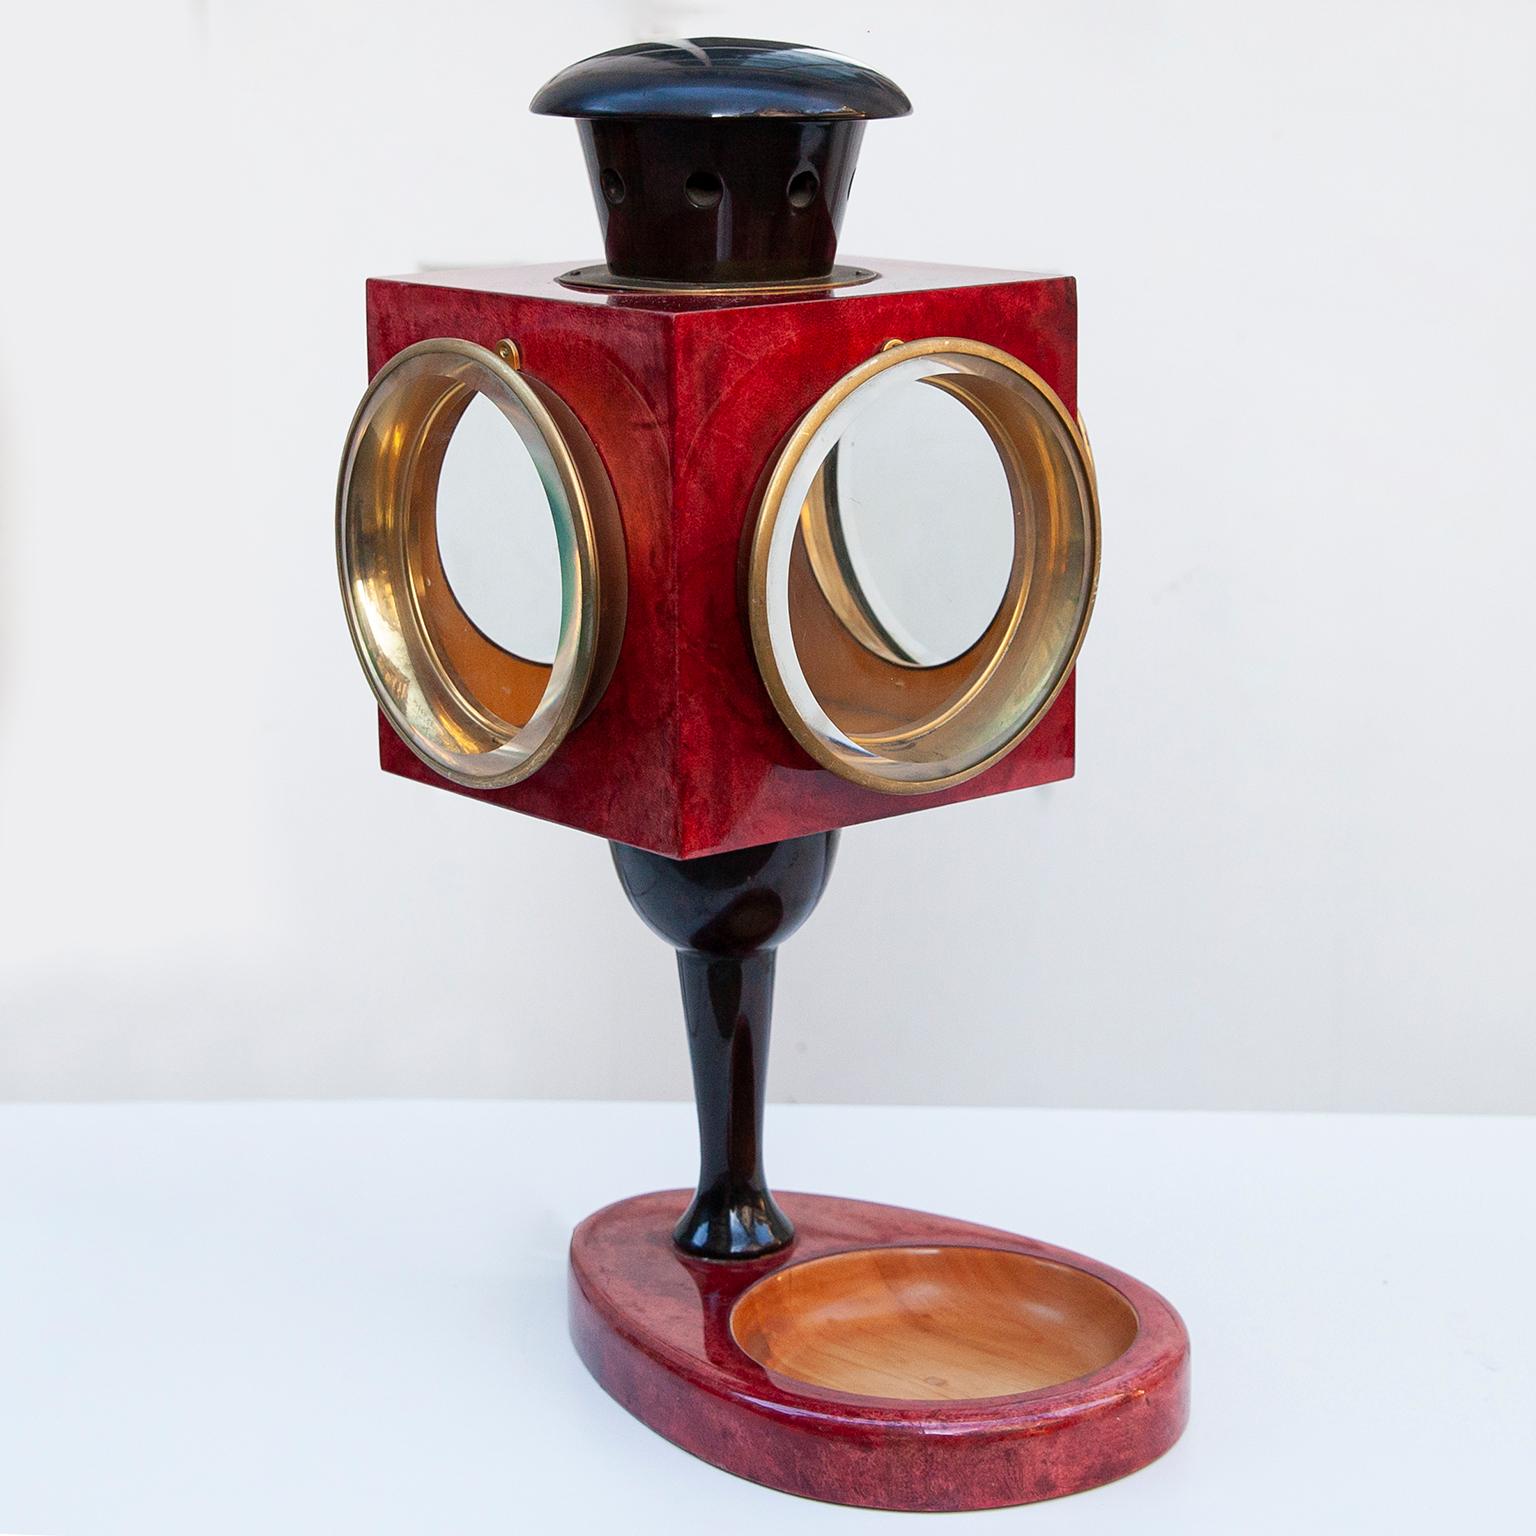 Superb lantern table lamp made by Aldo Tura, Italy in the 1960s.

The lamp was executed in lacquered red goatskin with brass rings and includes a little bowl and it is in very good condition.

Along with artists like Piero Fornasetti and Carlo